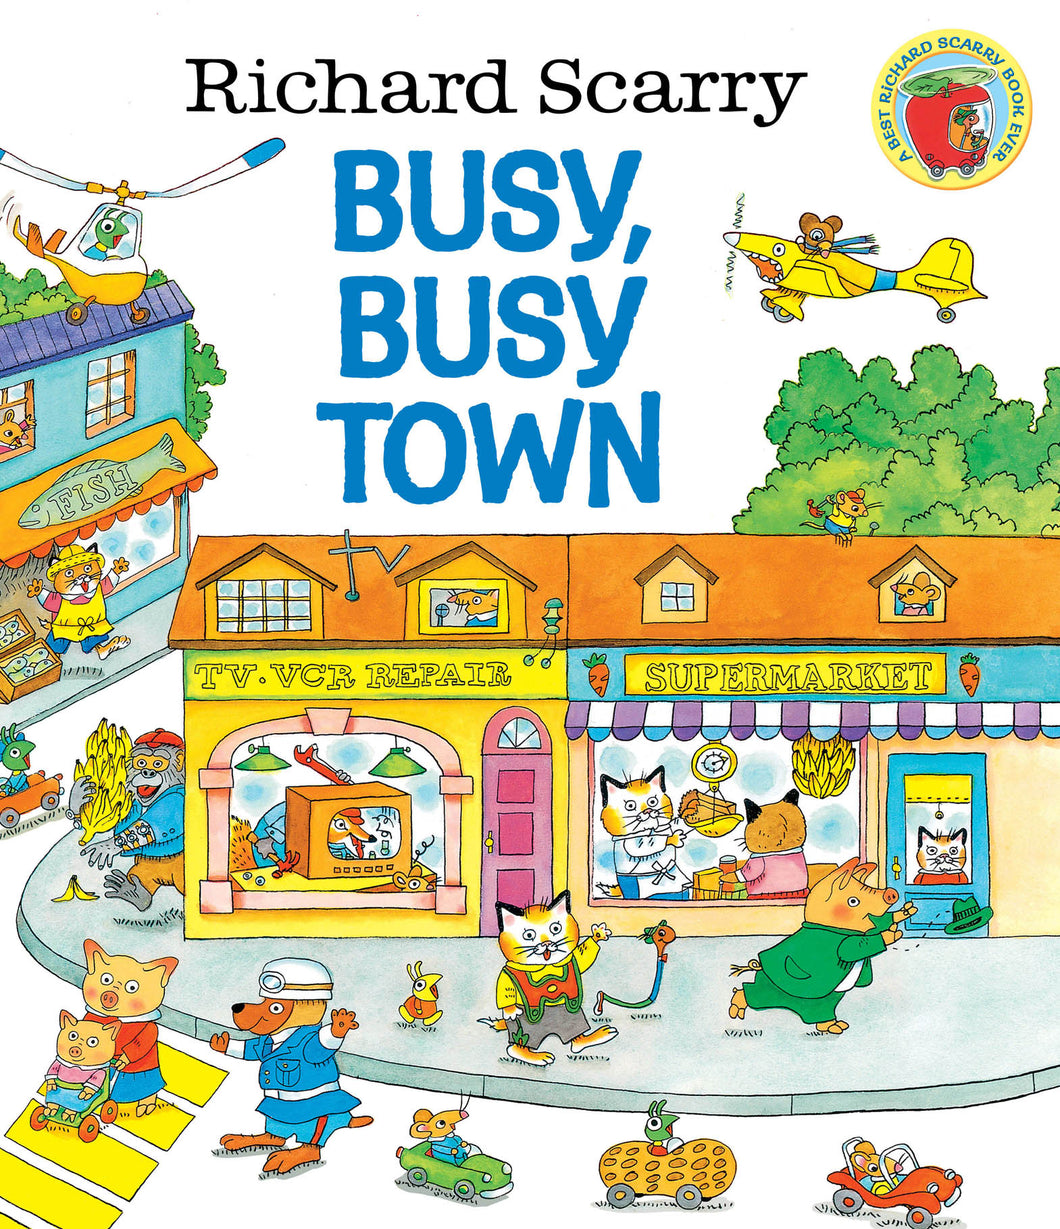 Richard Scarry's Busy, Busy Town